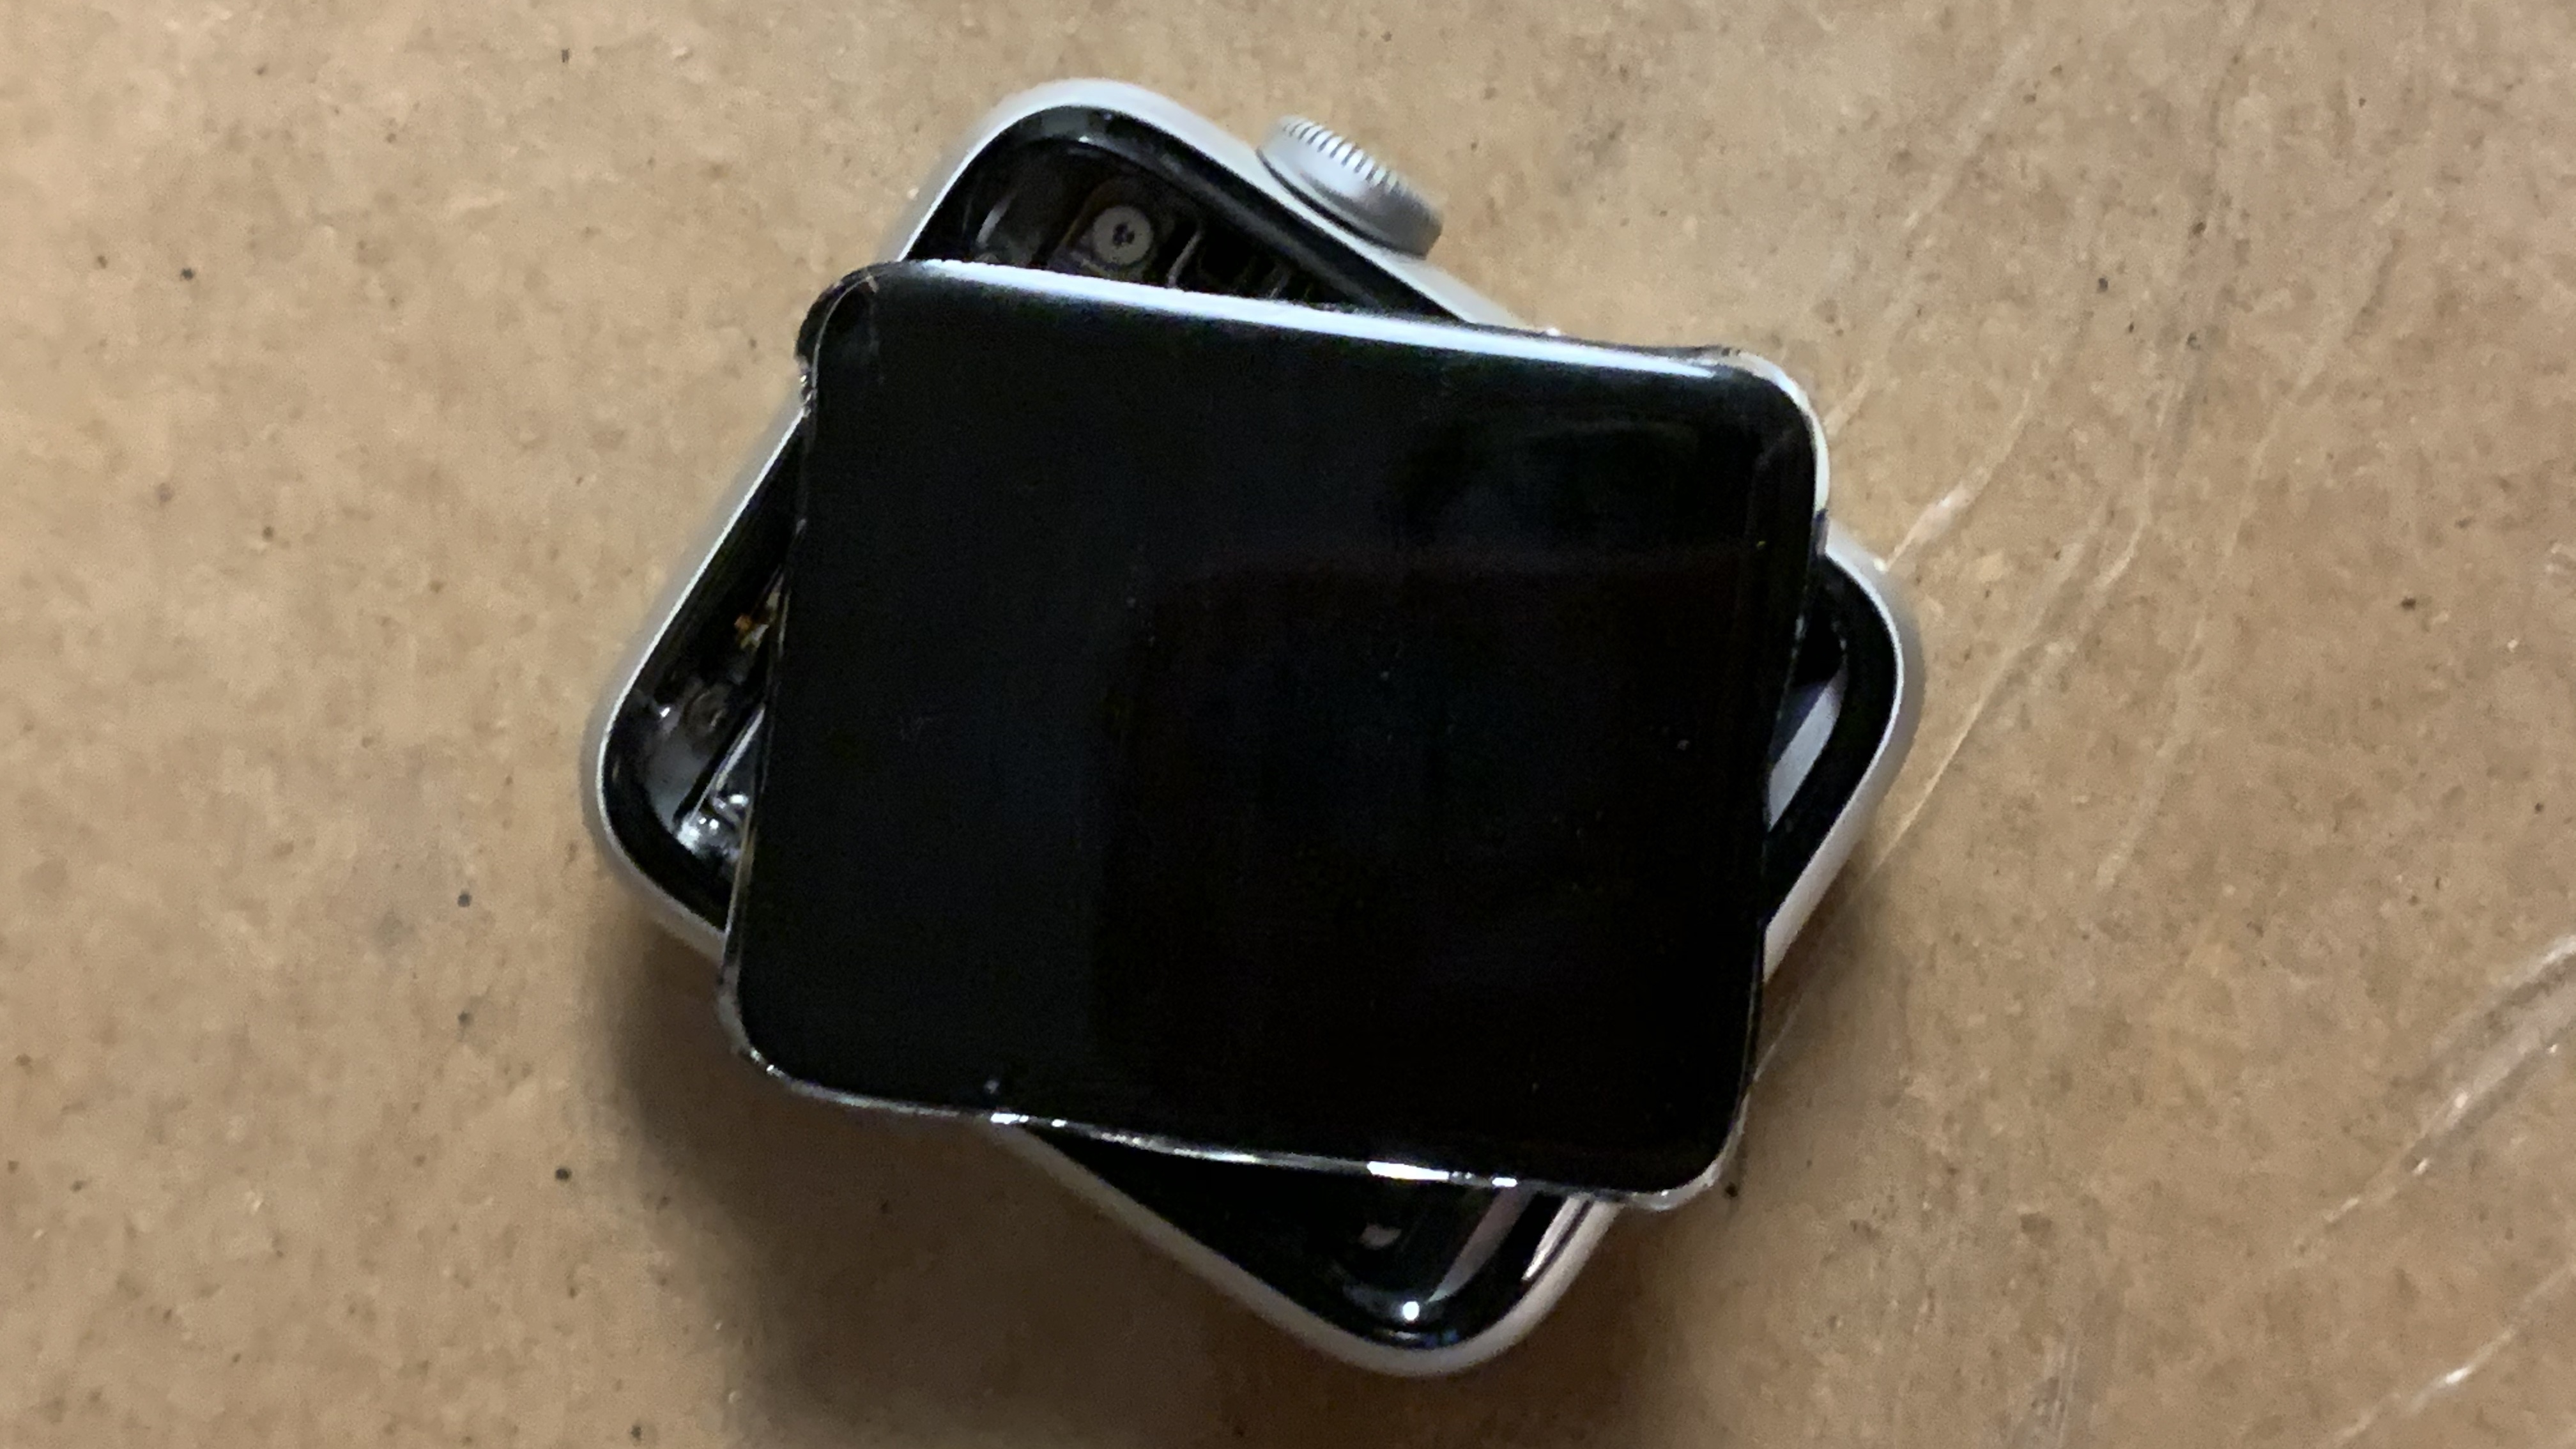 Apple Watch screen cracking? That may 